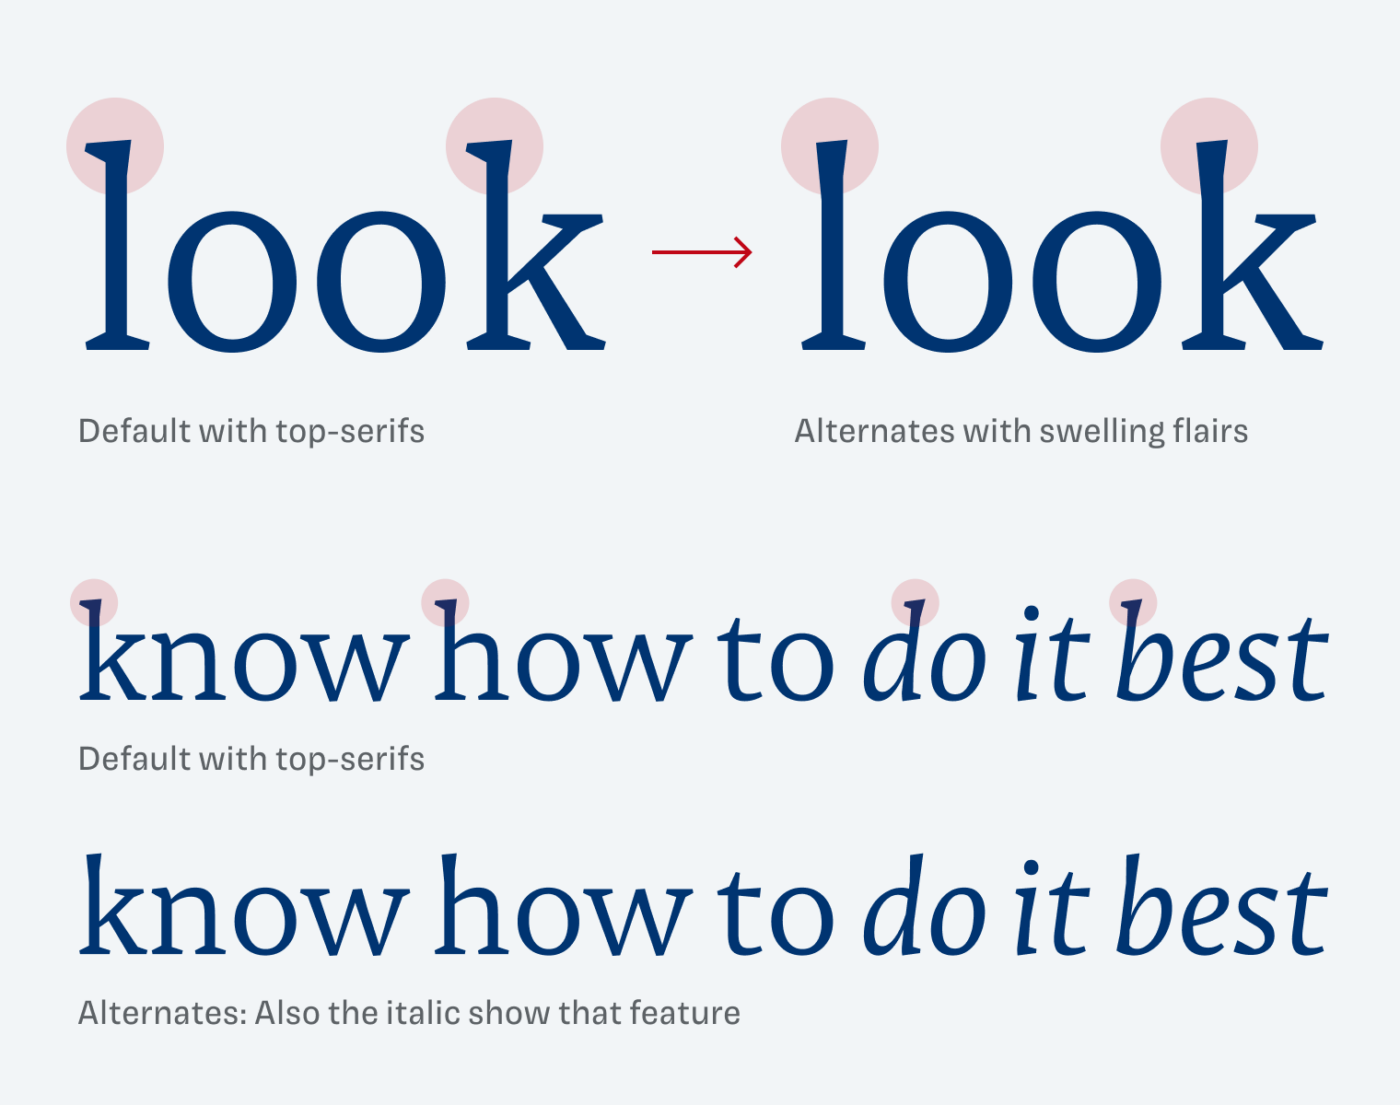 Default with top-serifs
Alternates with swelling flairs. In the alternates, also the italic show that feature